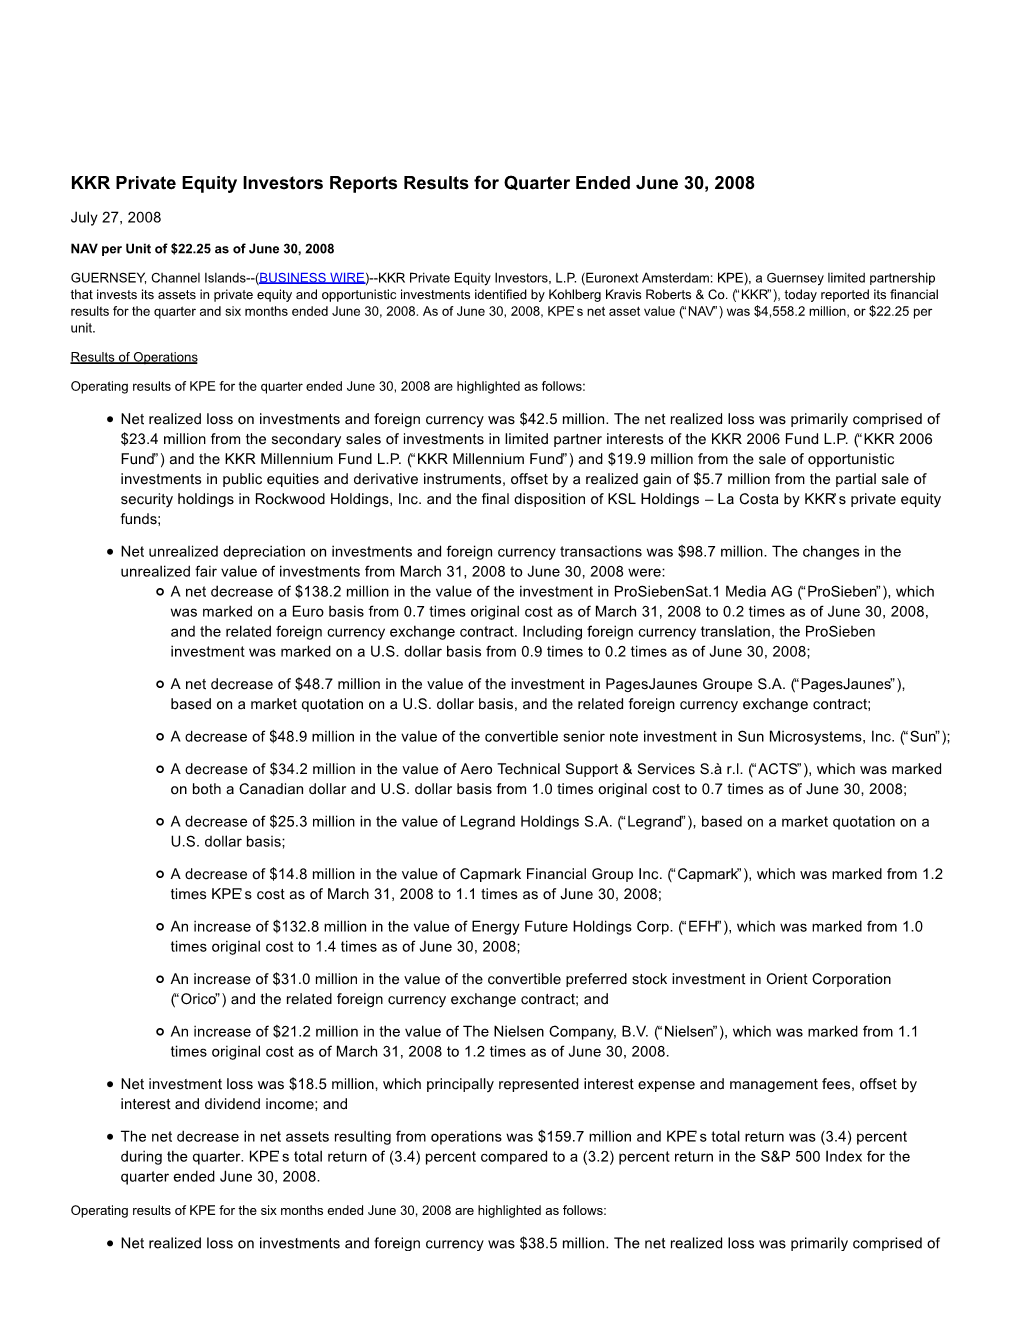 KKR Private Equity Investors Reports Results for Quarter Ended June 30, 2008